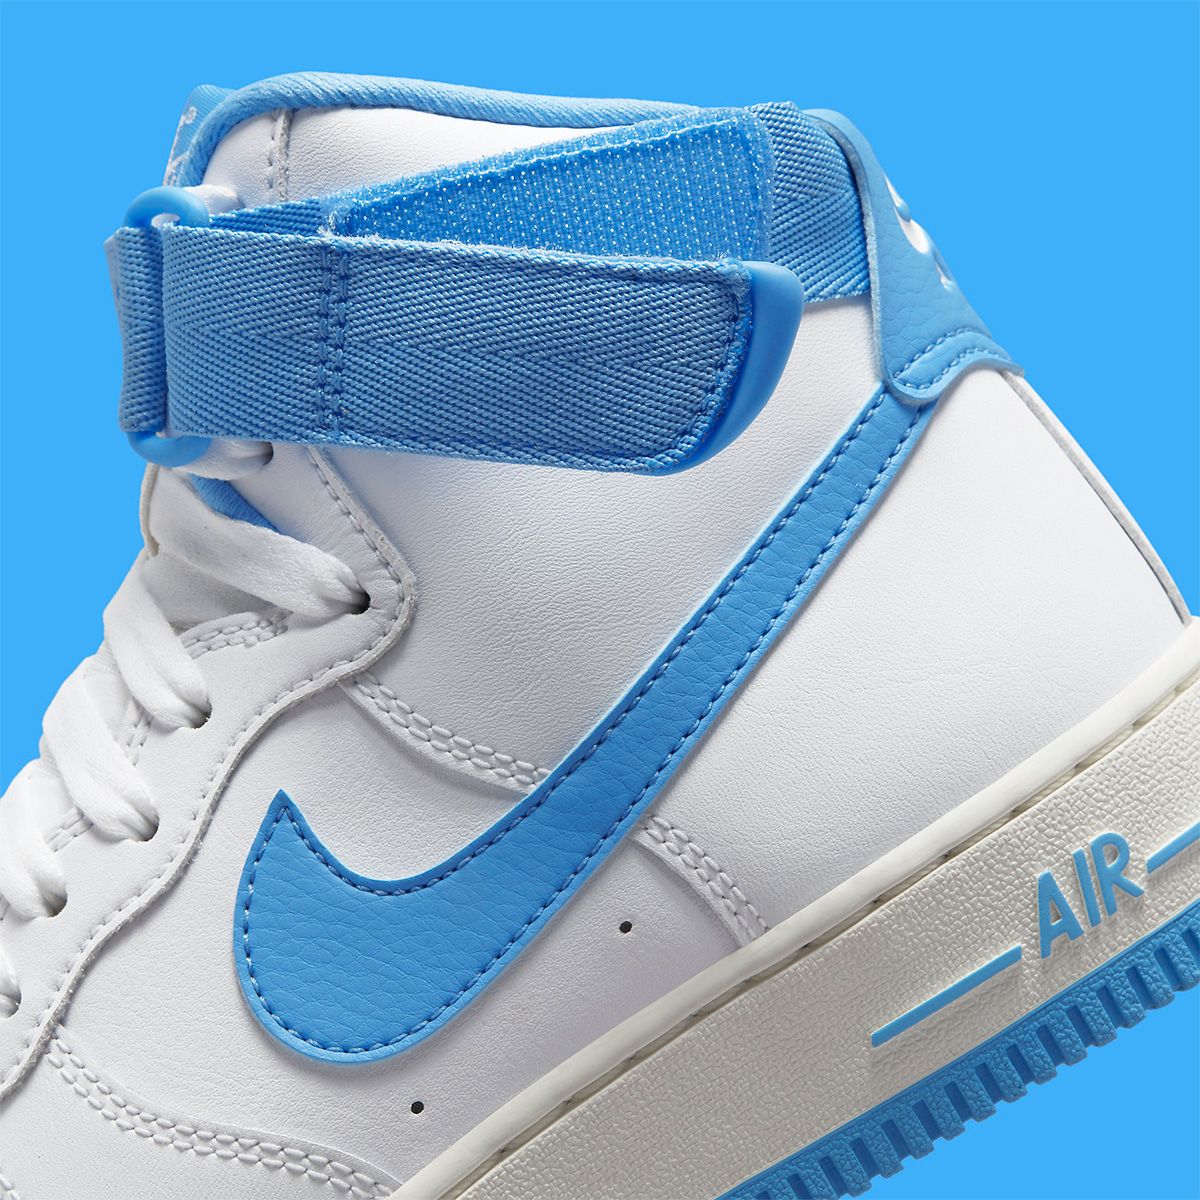 Nike Air Force 1 High University Blue DX3805-100 Release Date